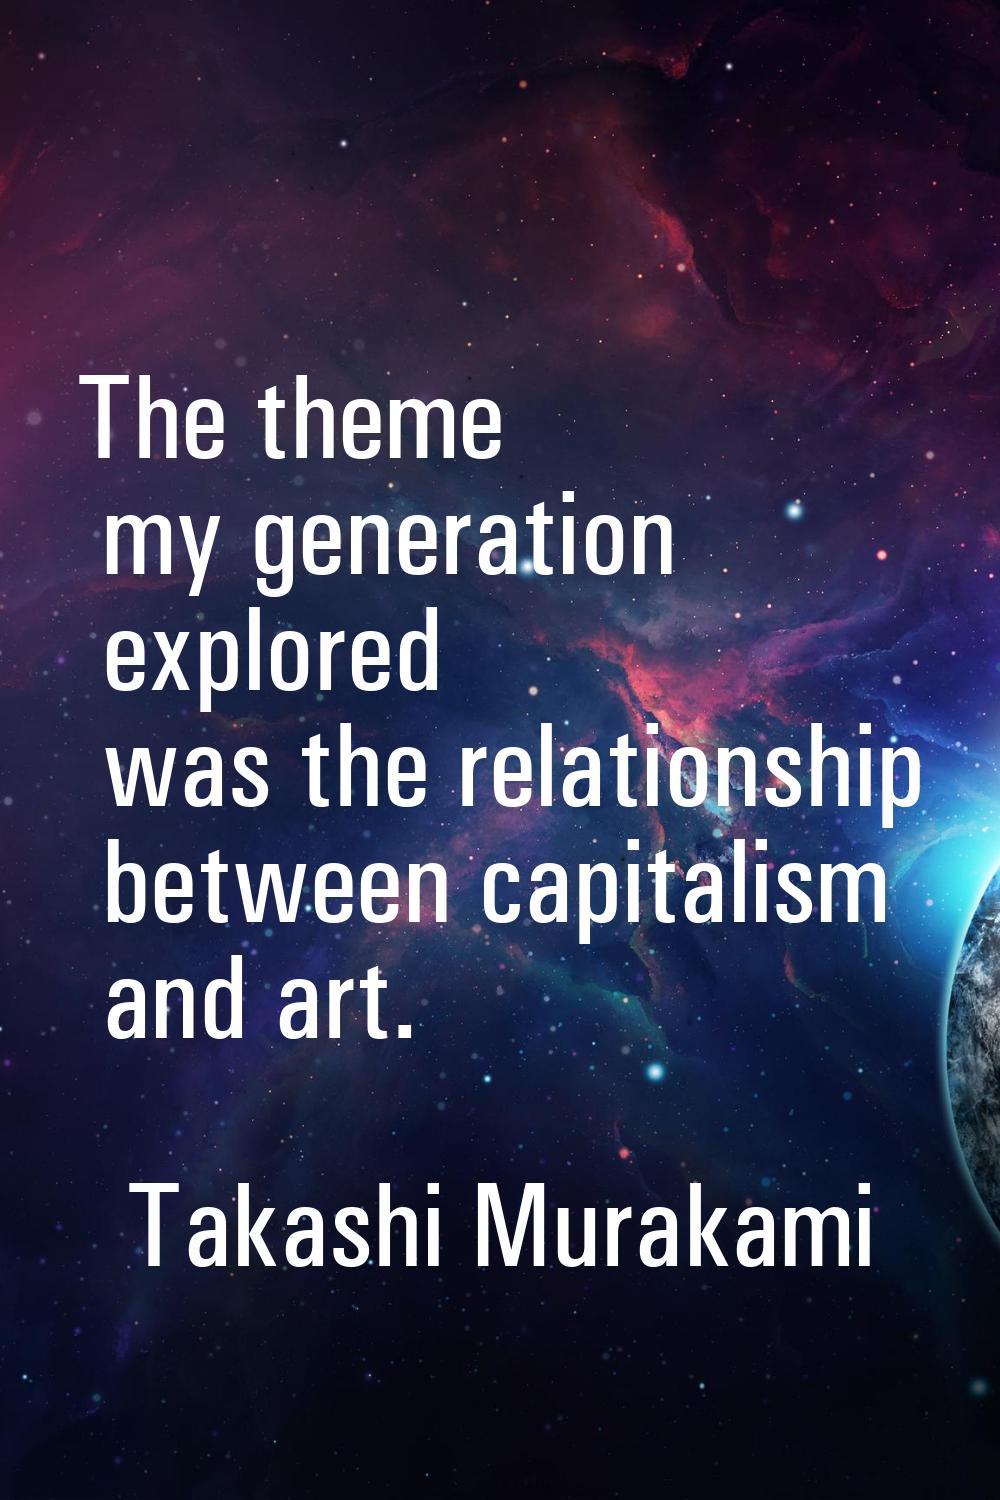 The theme my generation explored was the relationship between capitalism and art.